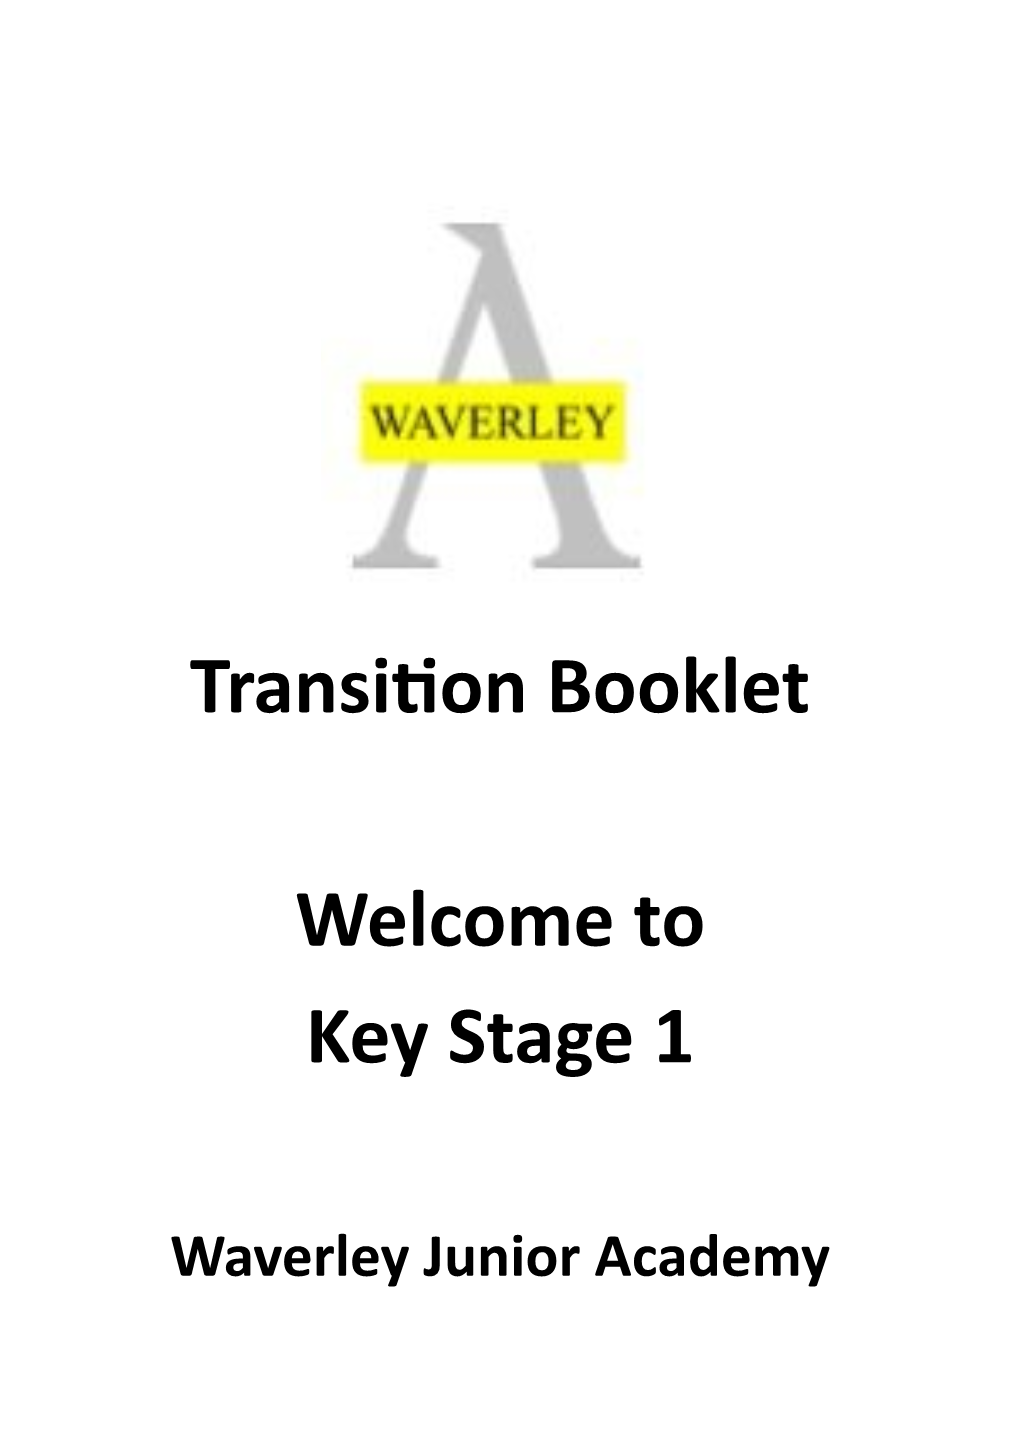 Transition Booklet Welcome to Key Stage 1